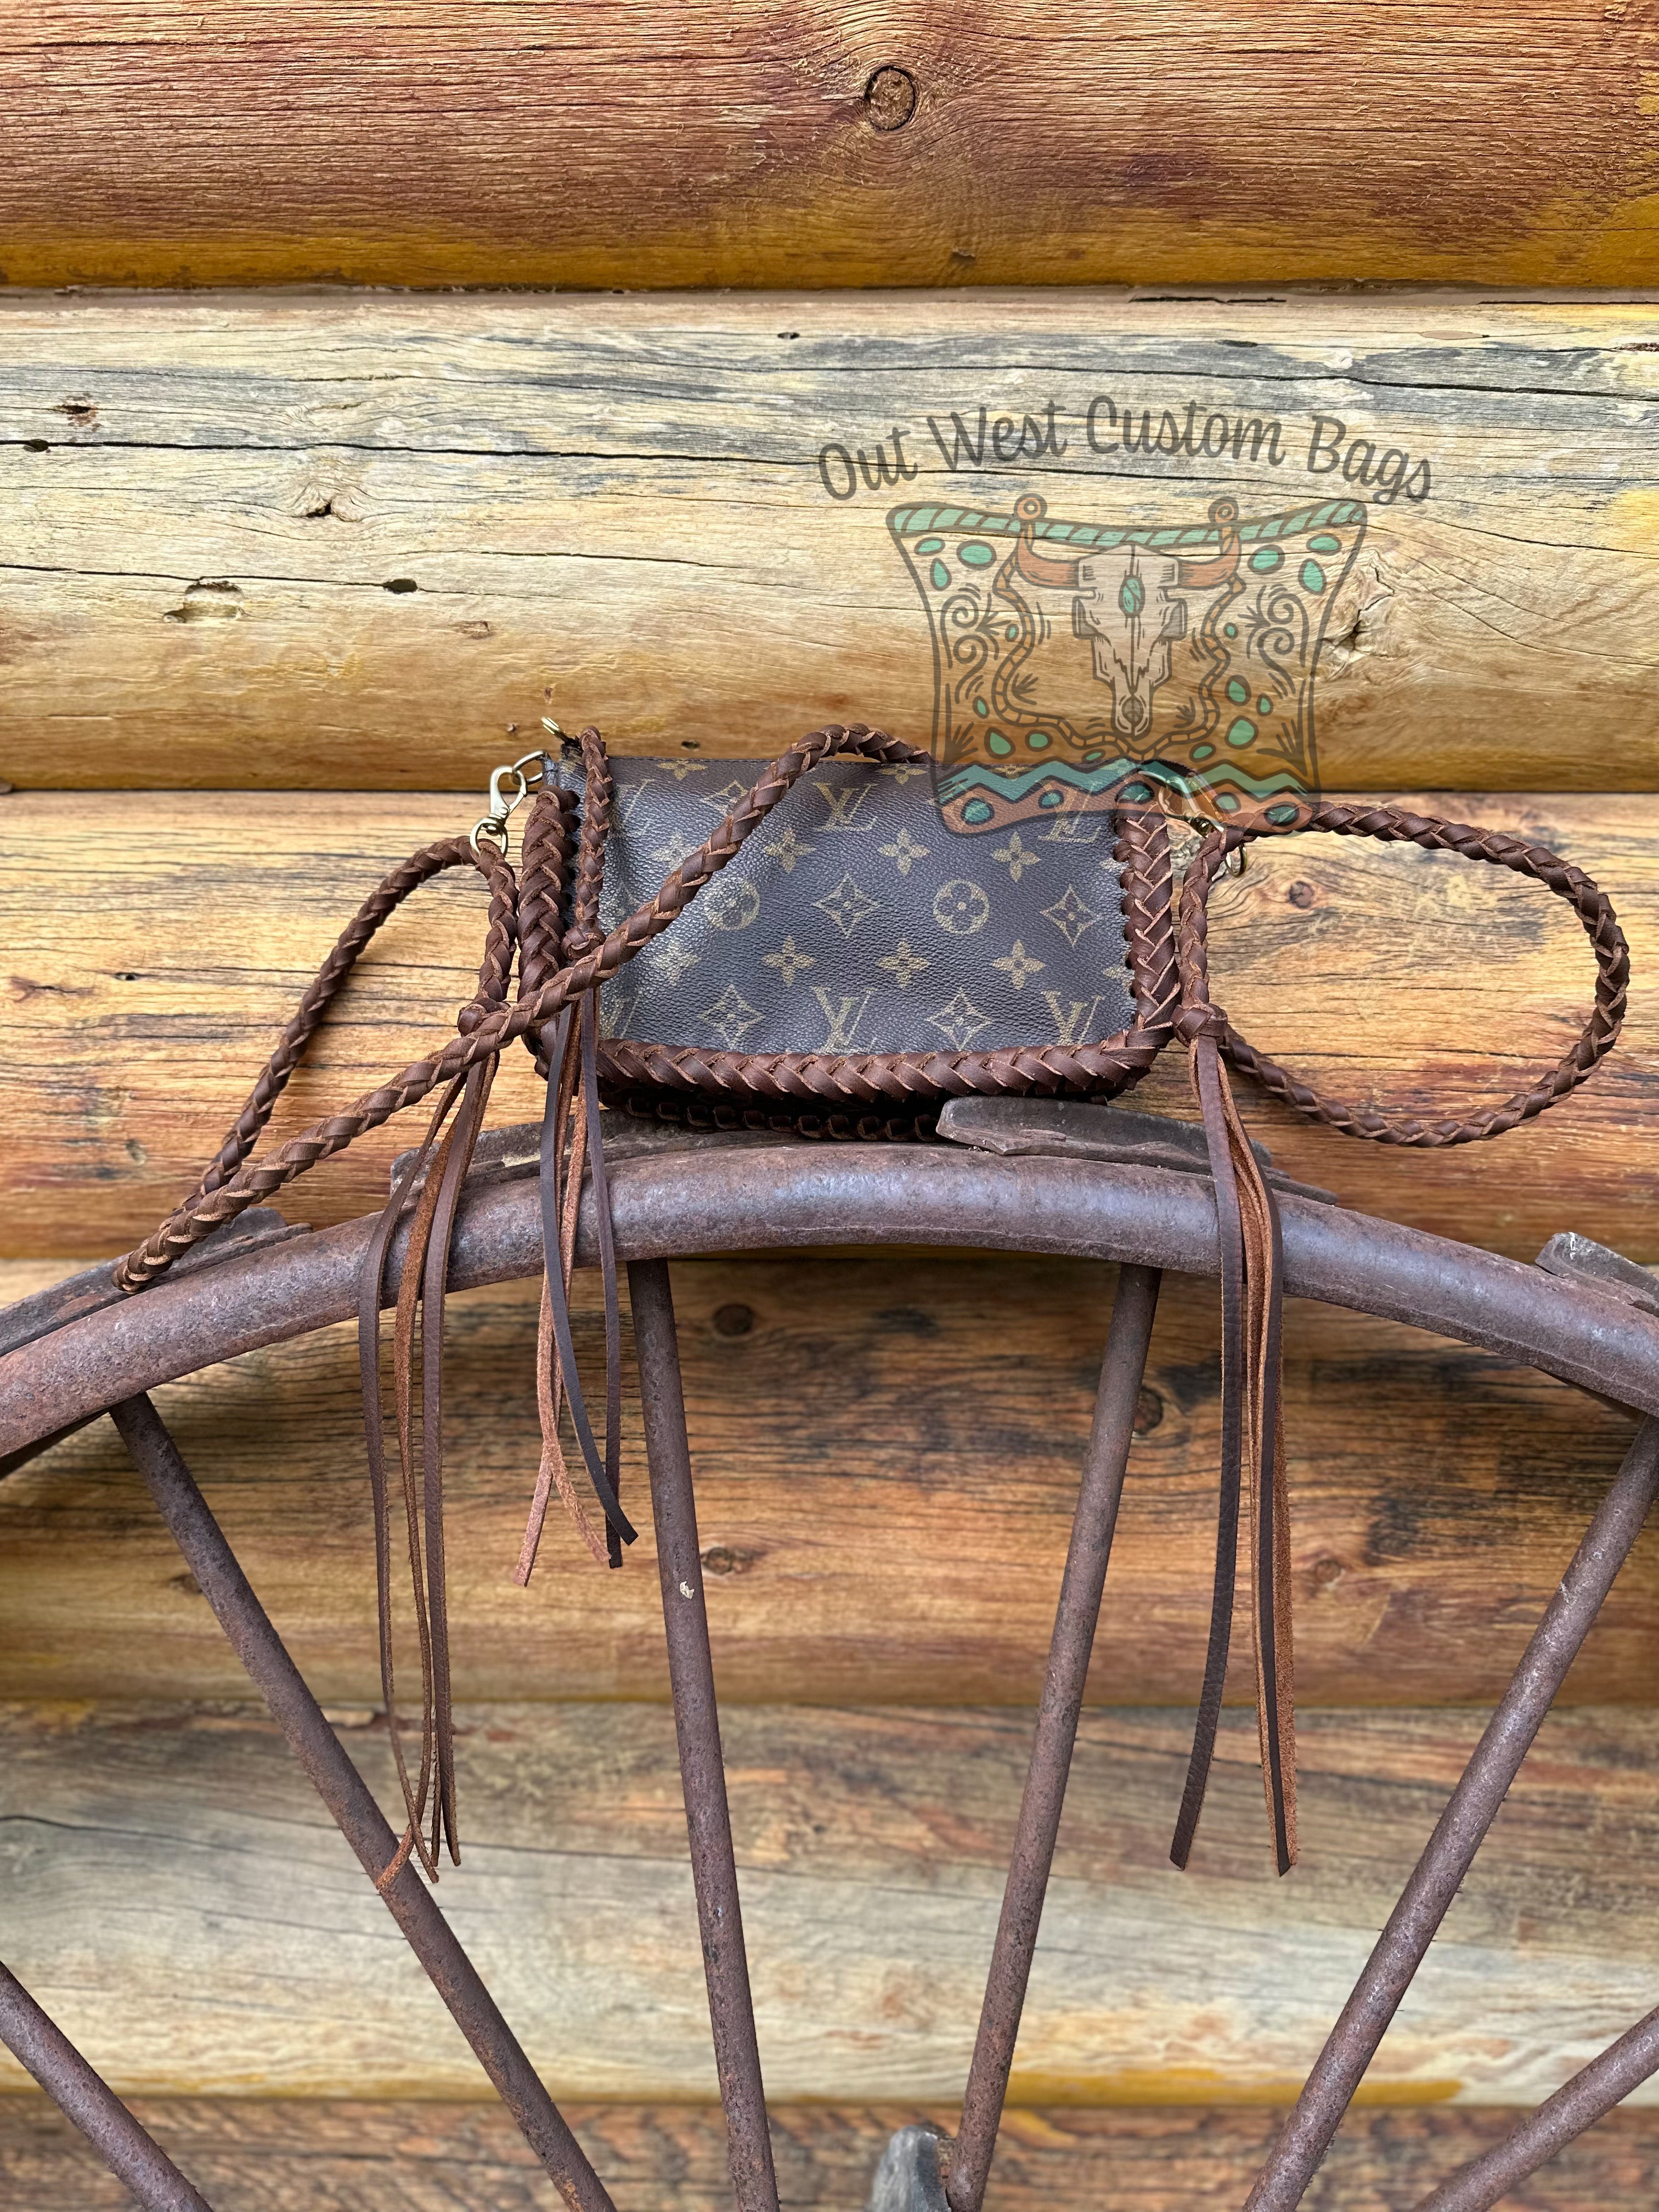 Out West GM Pouch Wristlet/Crossbody Revamped Leather Braiding